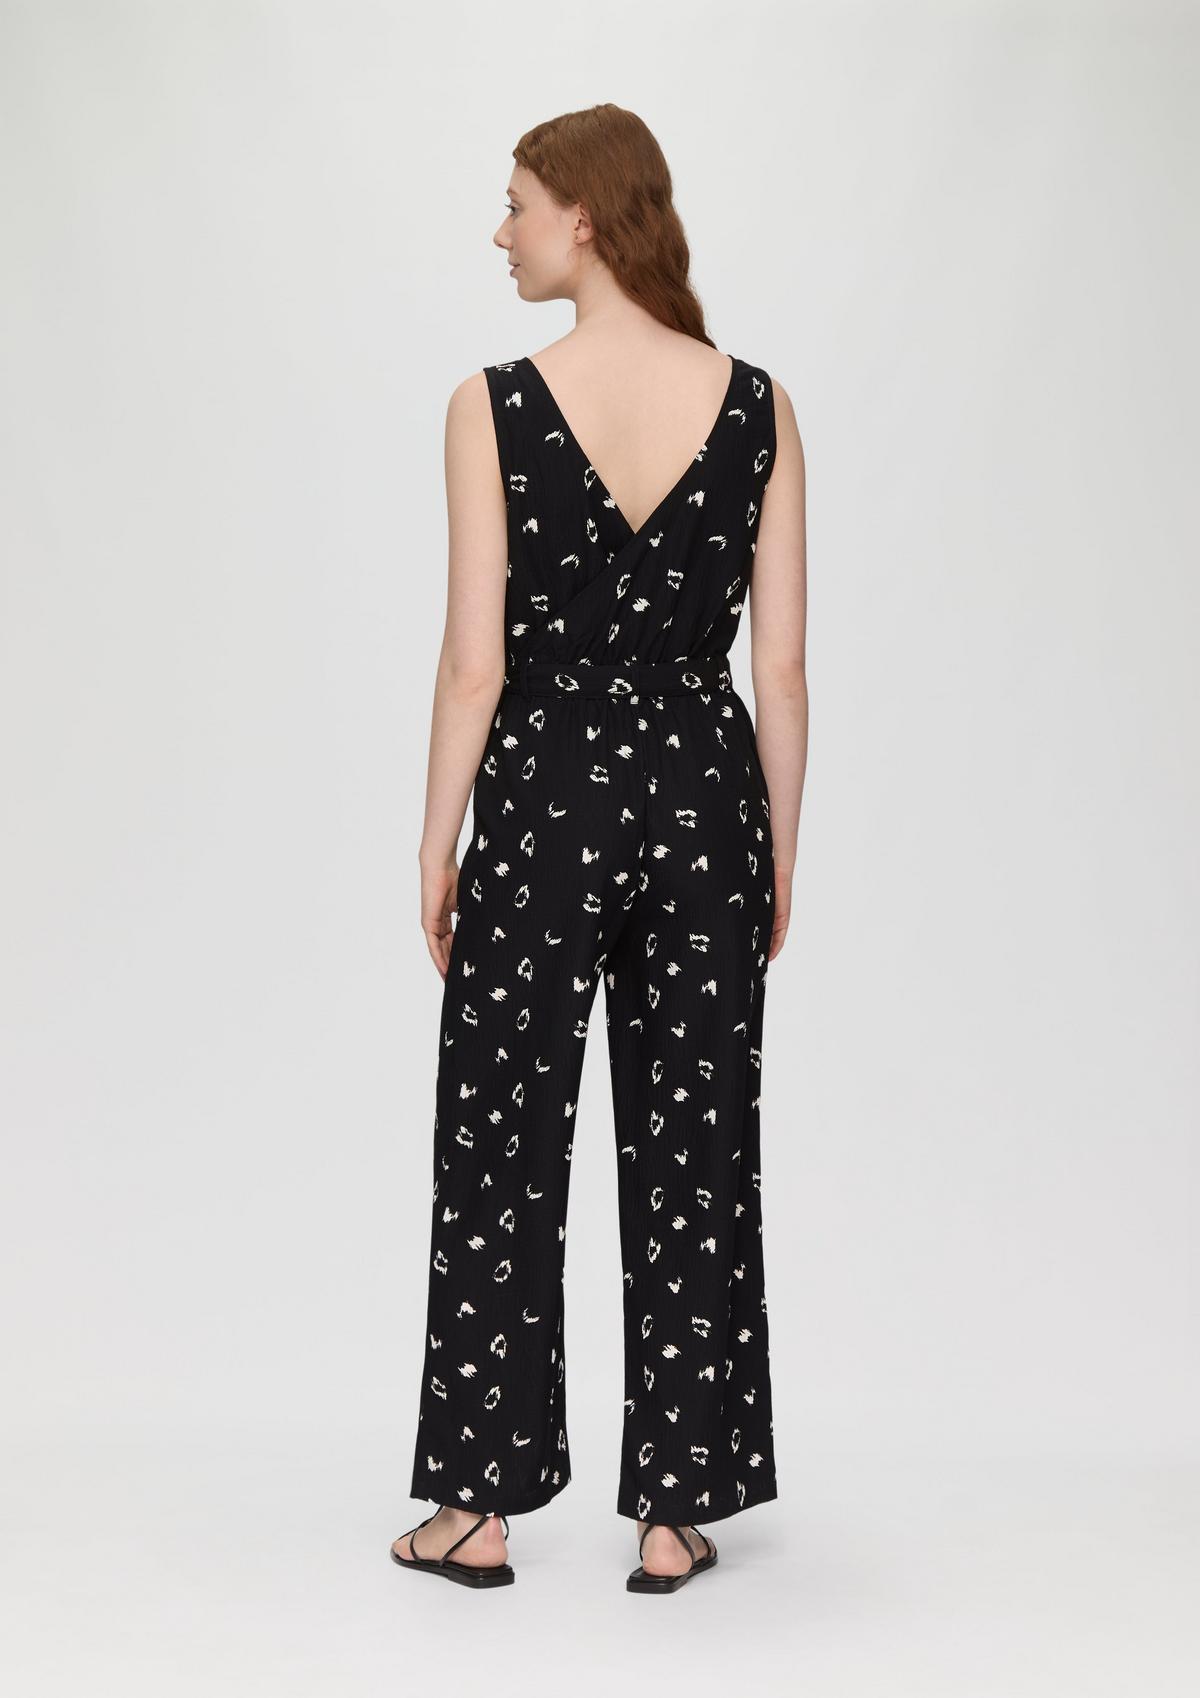 s.Oliver Sleeveless jumpsuit with slit pockets and ties